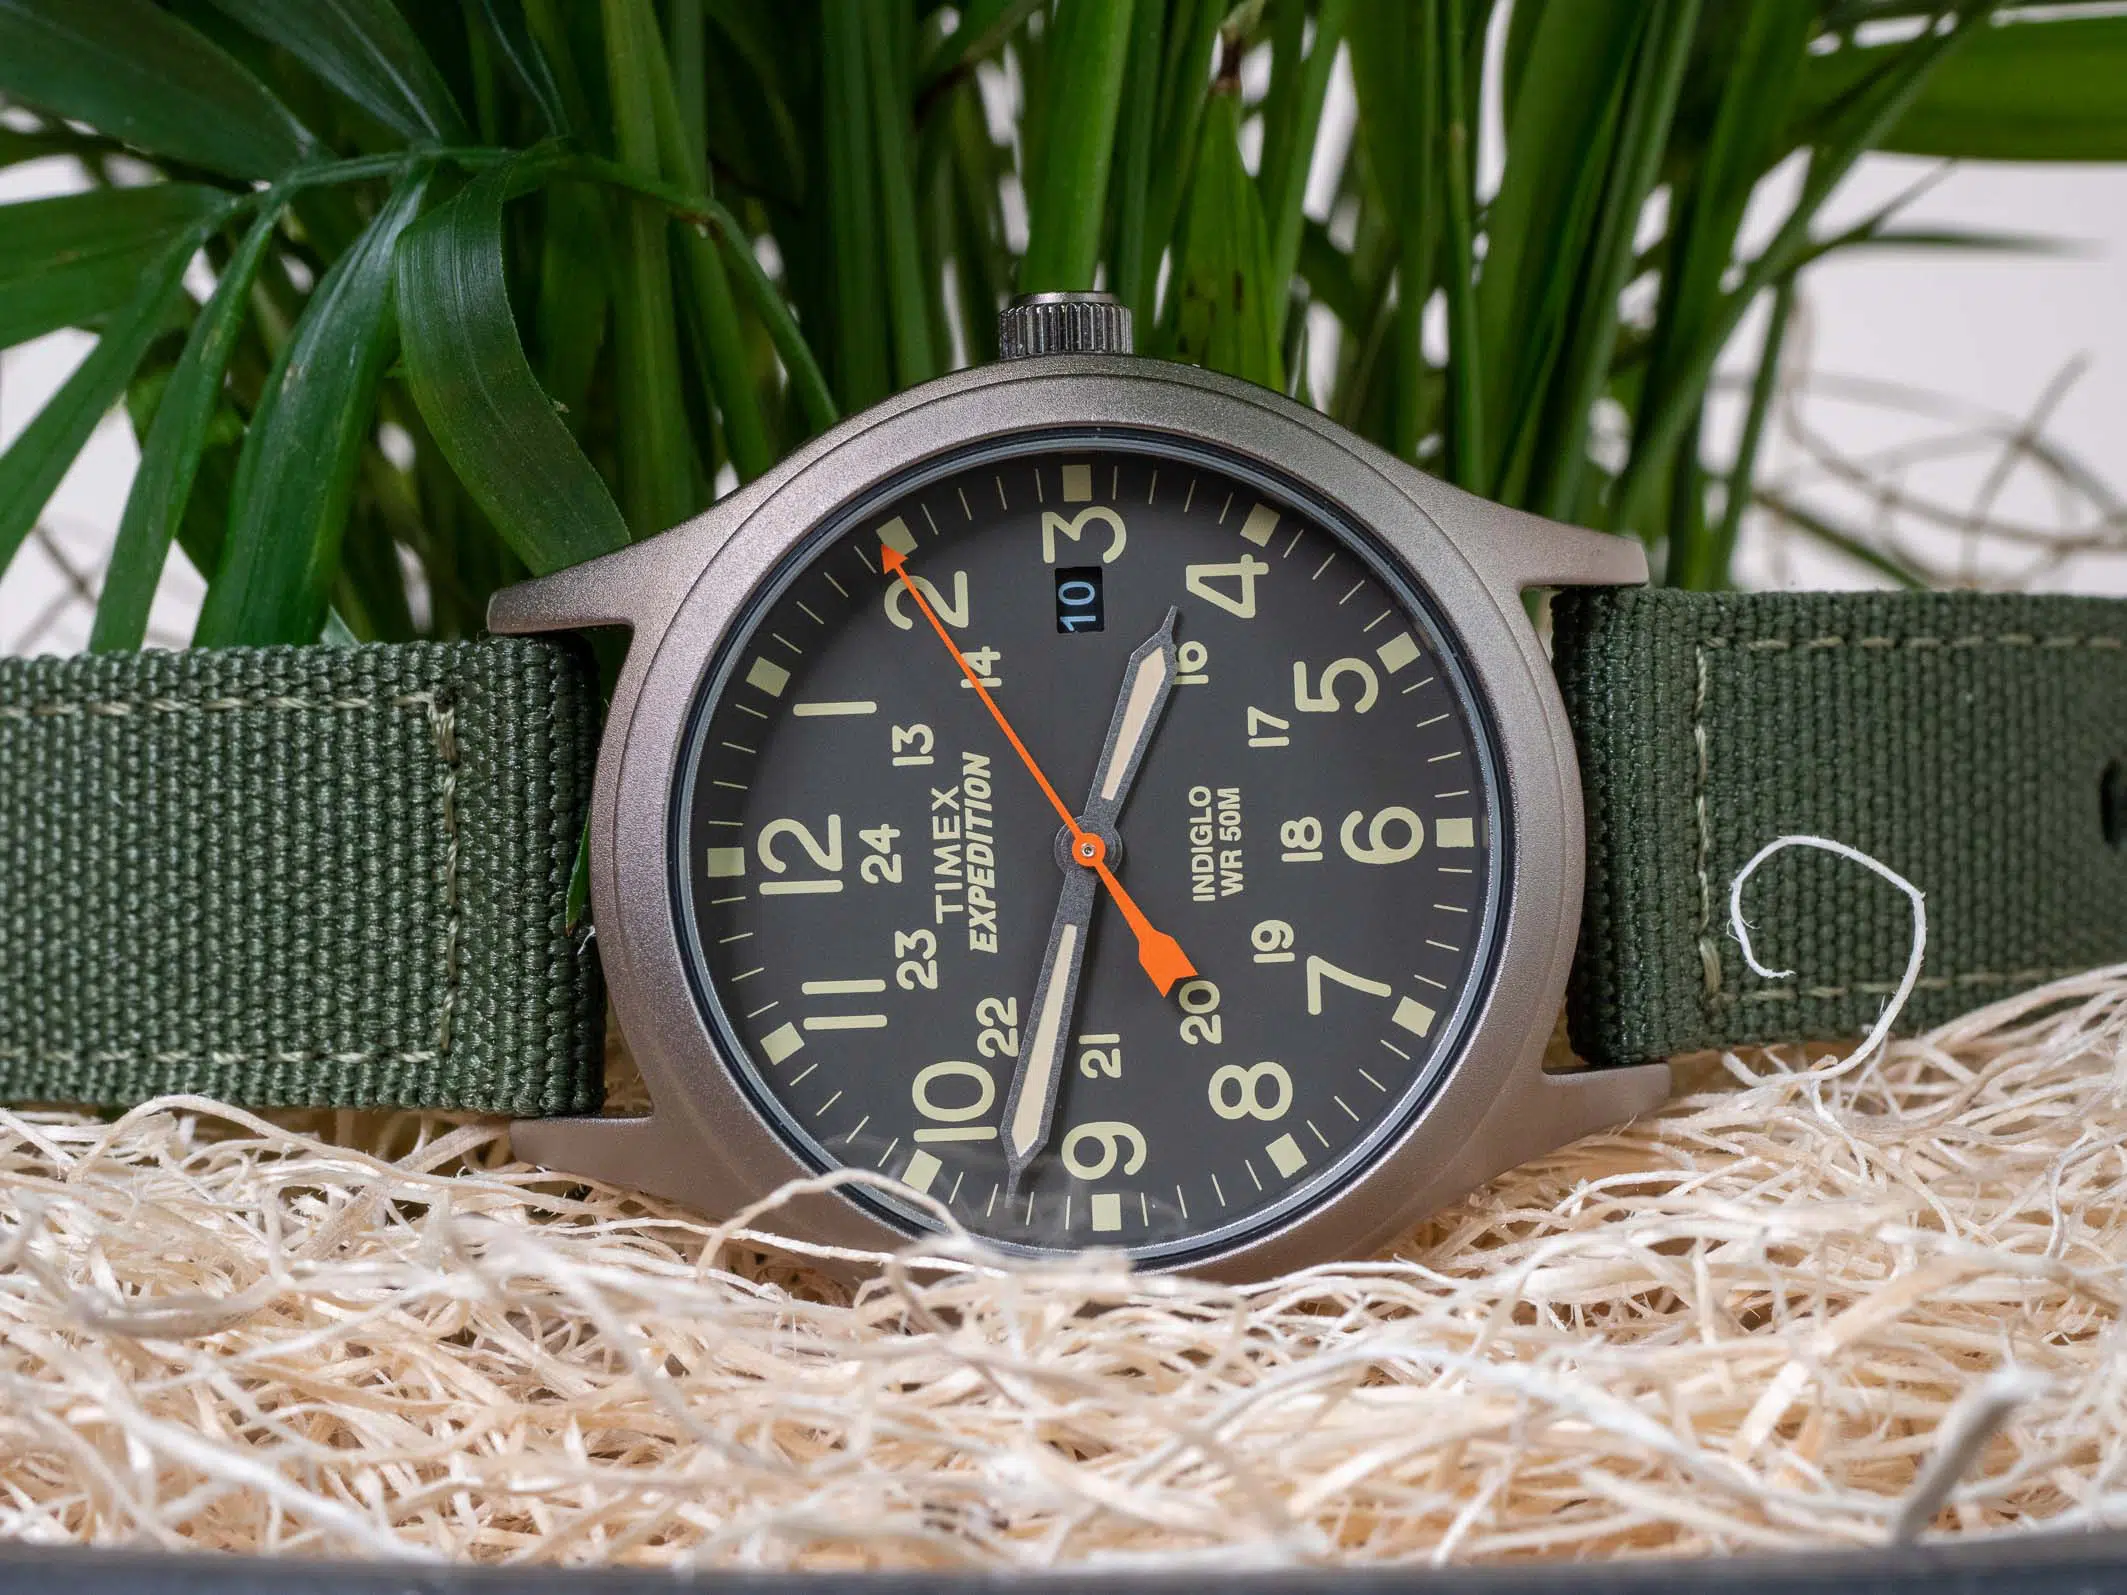 Timex Expedition TW4B13900 watch review